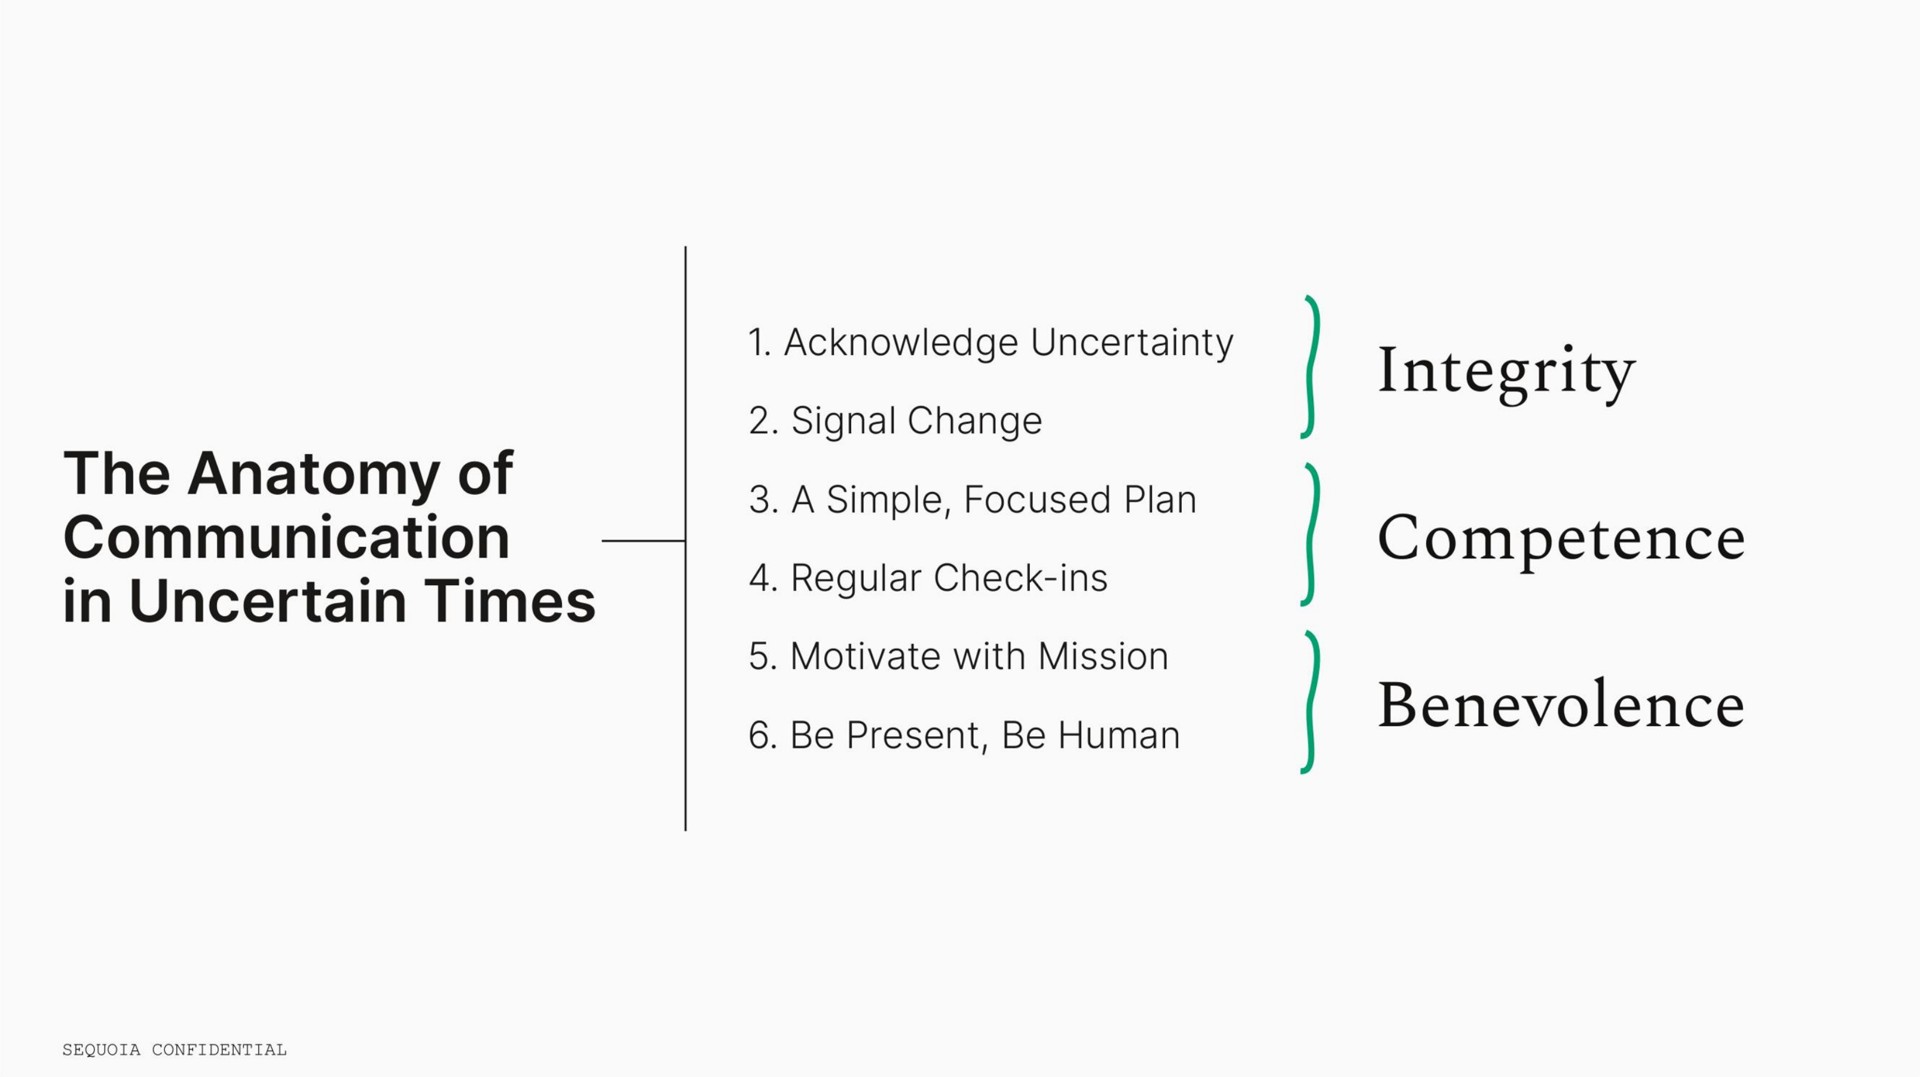 integrity competence the anatomy of communication in uncertain times | Sequoia Capital